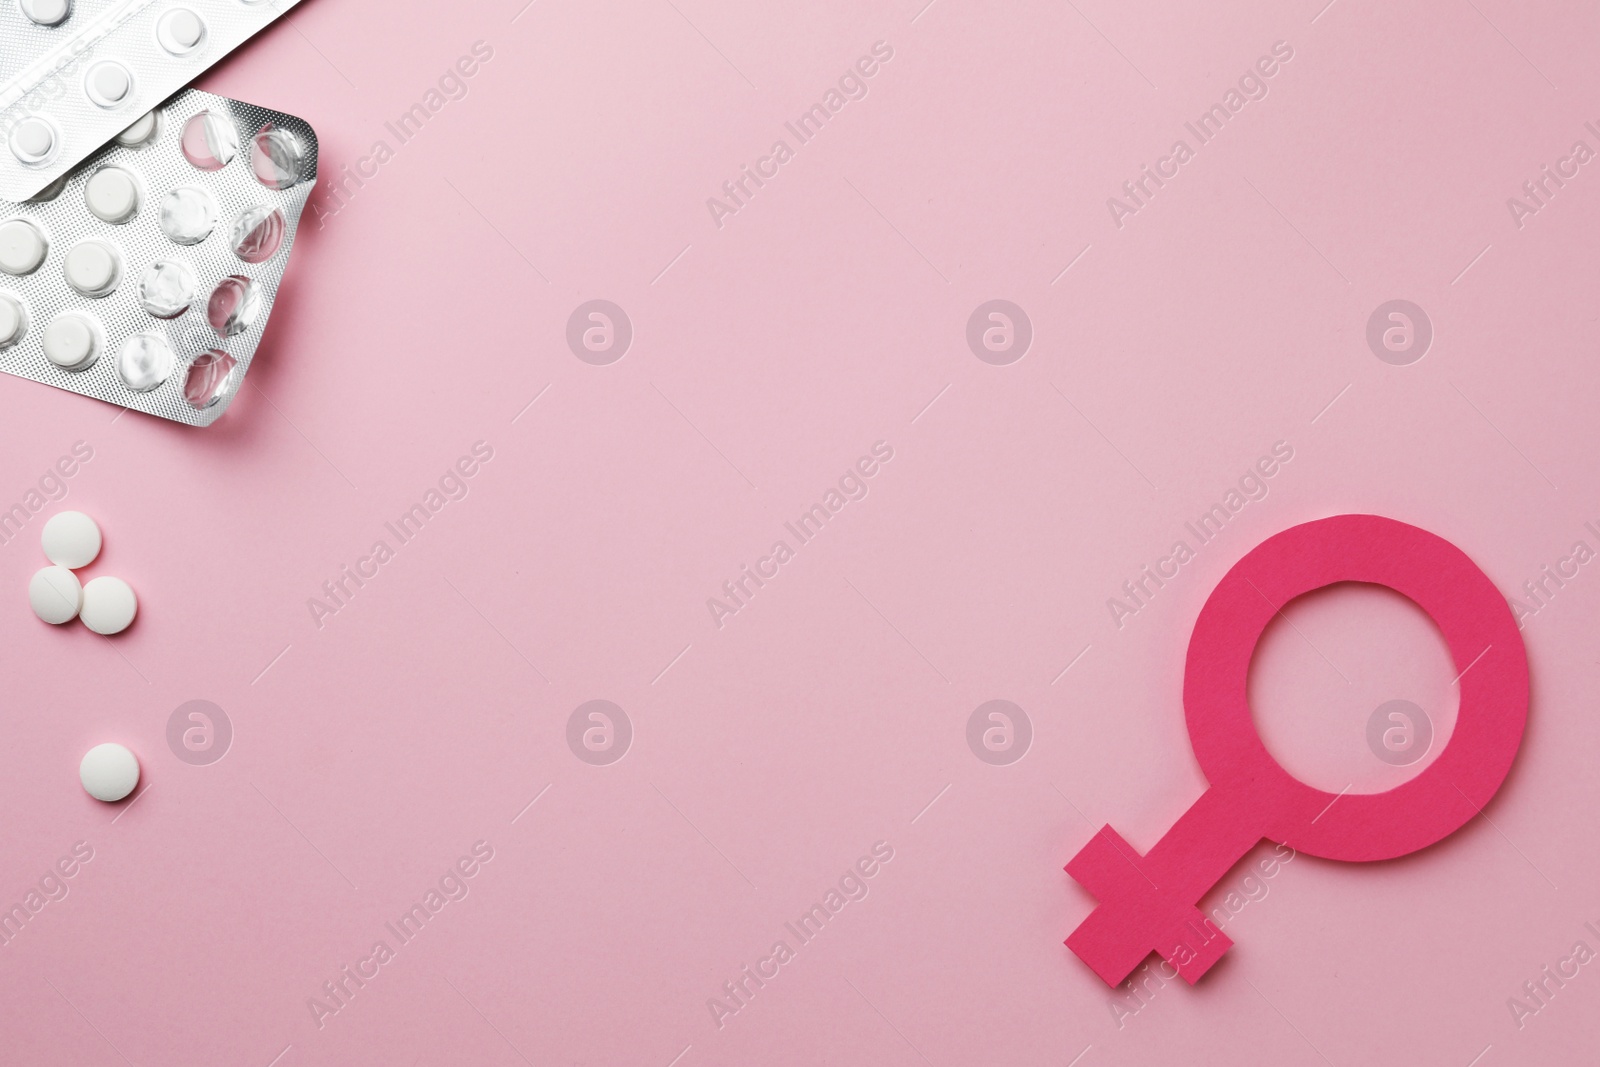 Photo of Female gender sign, pills and space for text on pink background, flat lay. Women's health concept